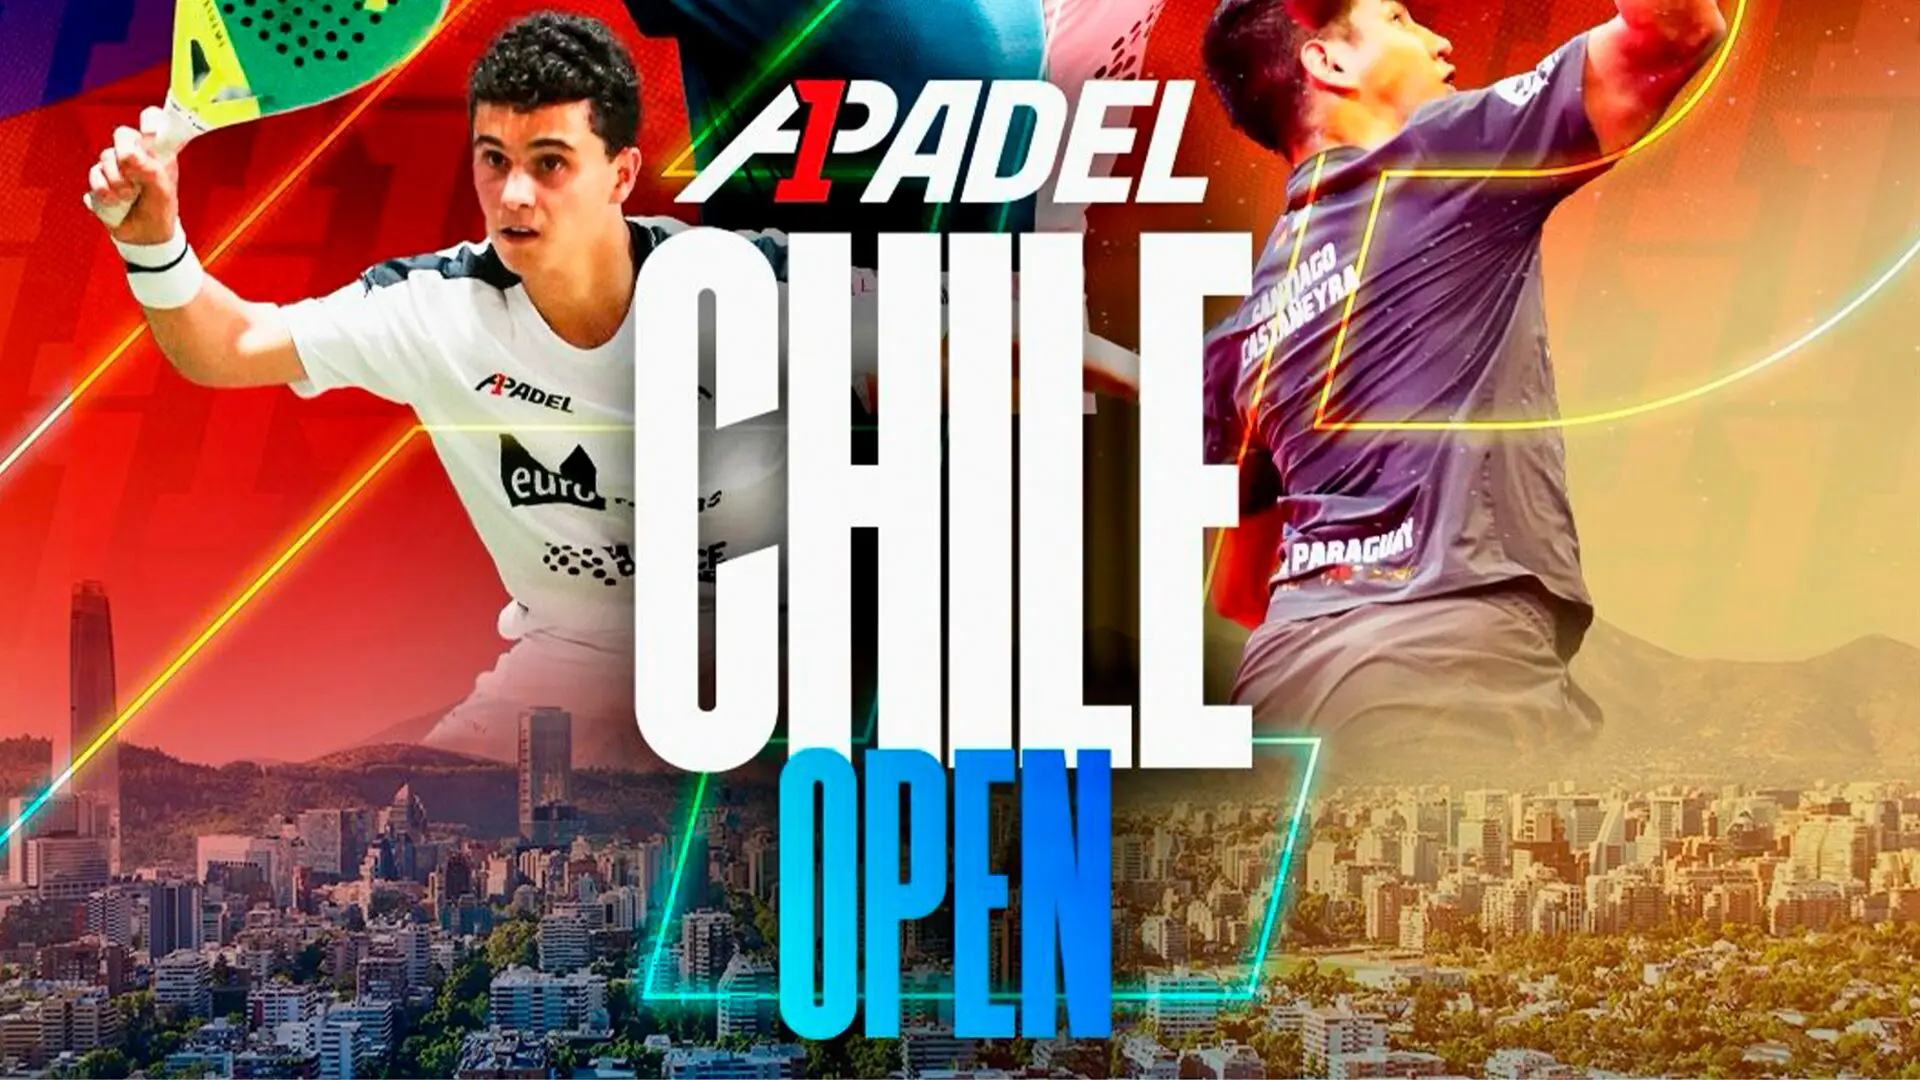 A1 Padel : let's go for the Chile Open!